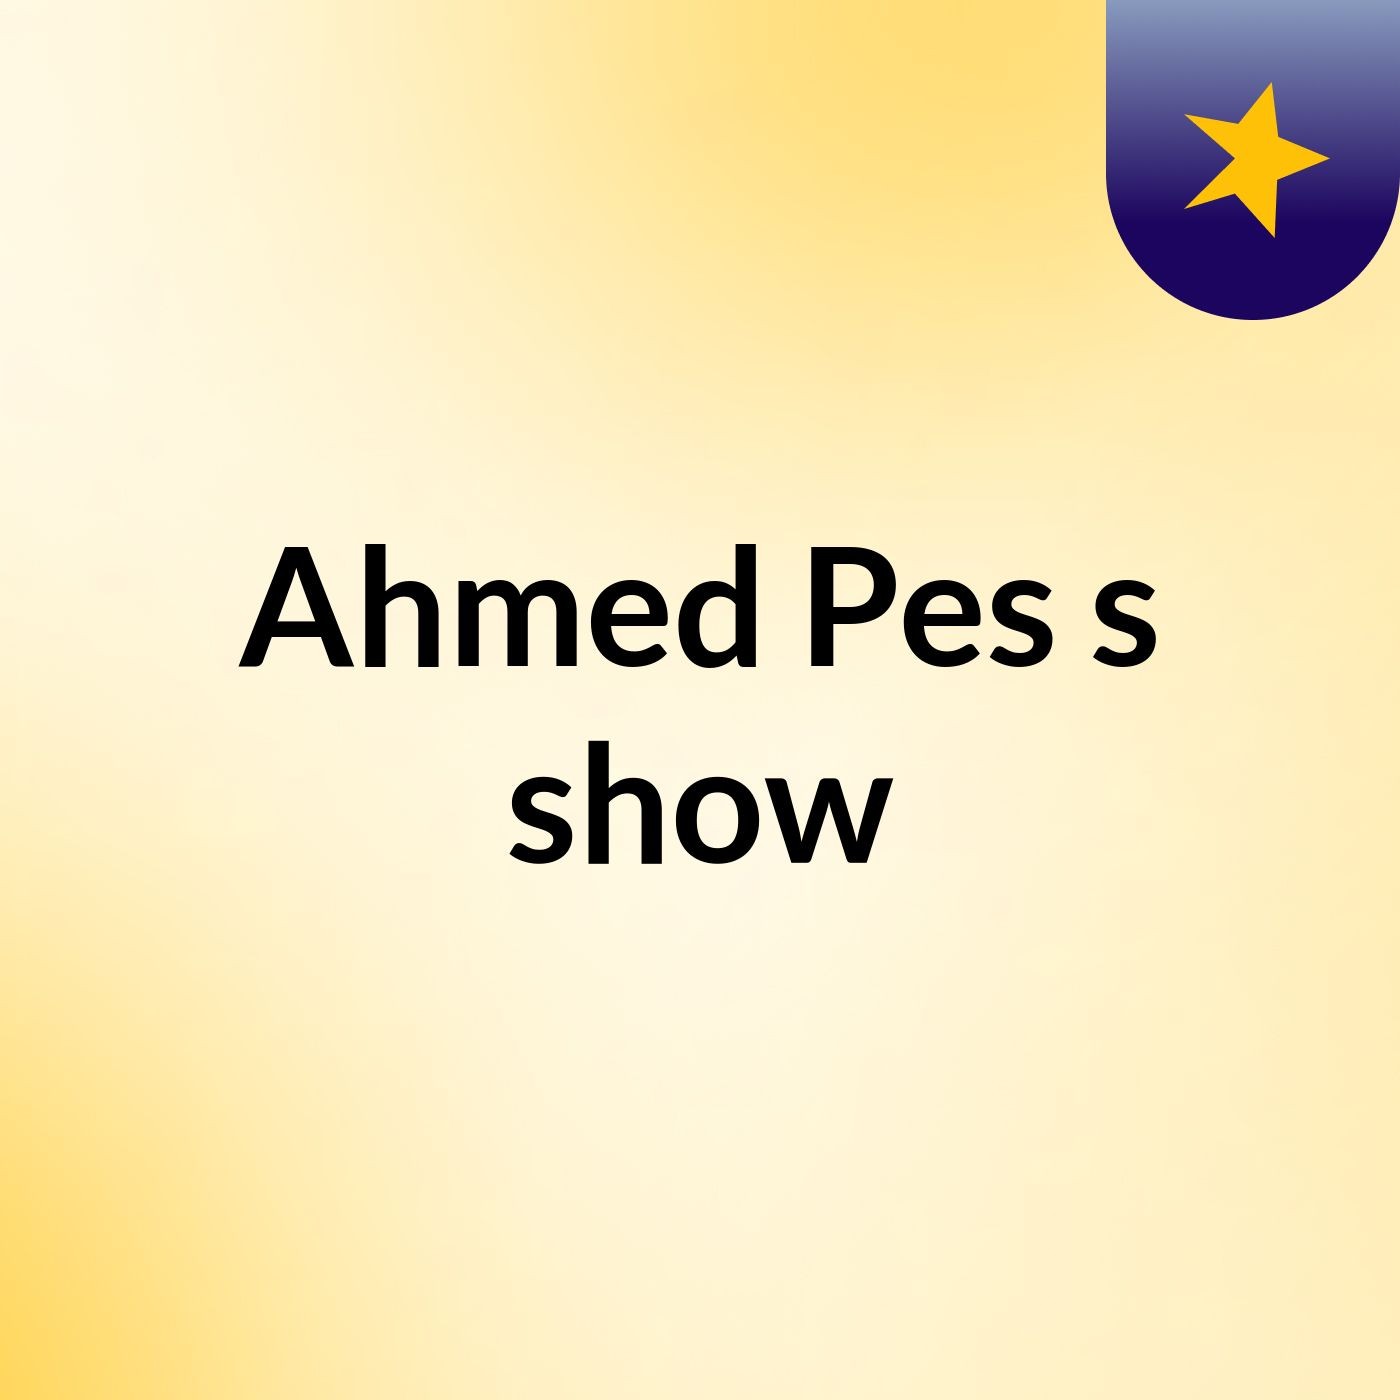 Ahmed Pes's show